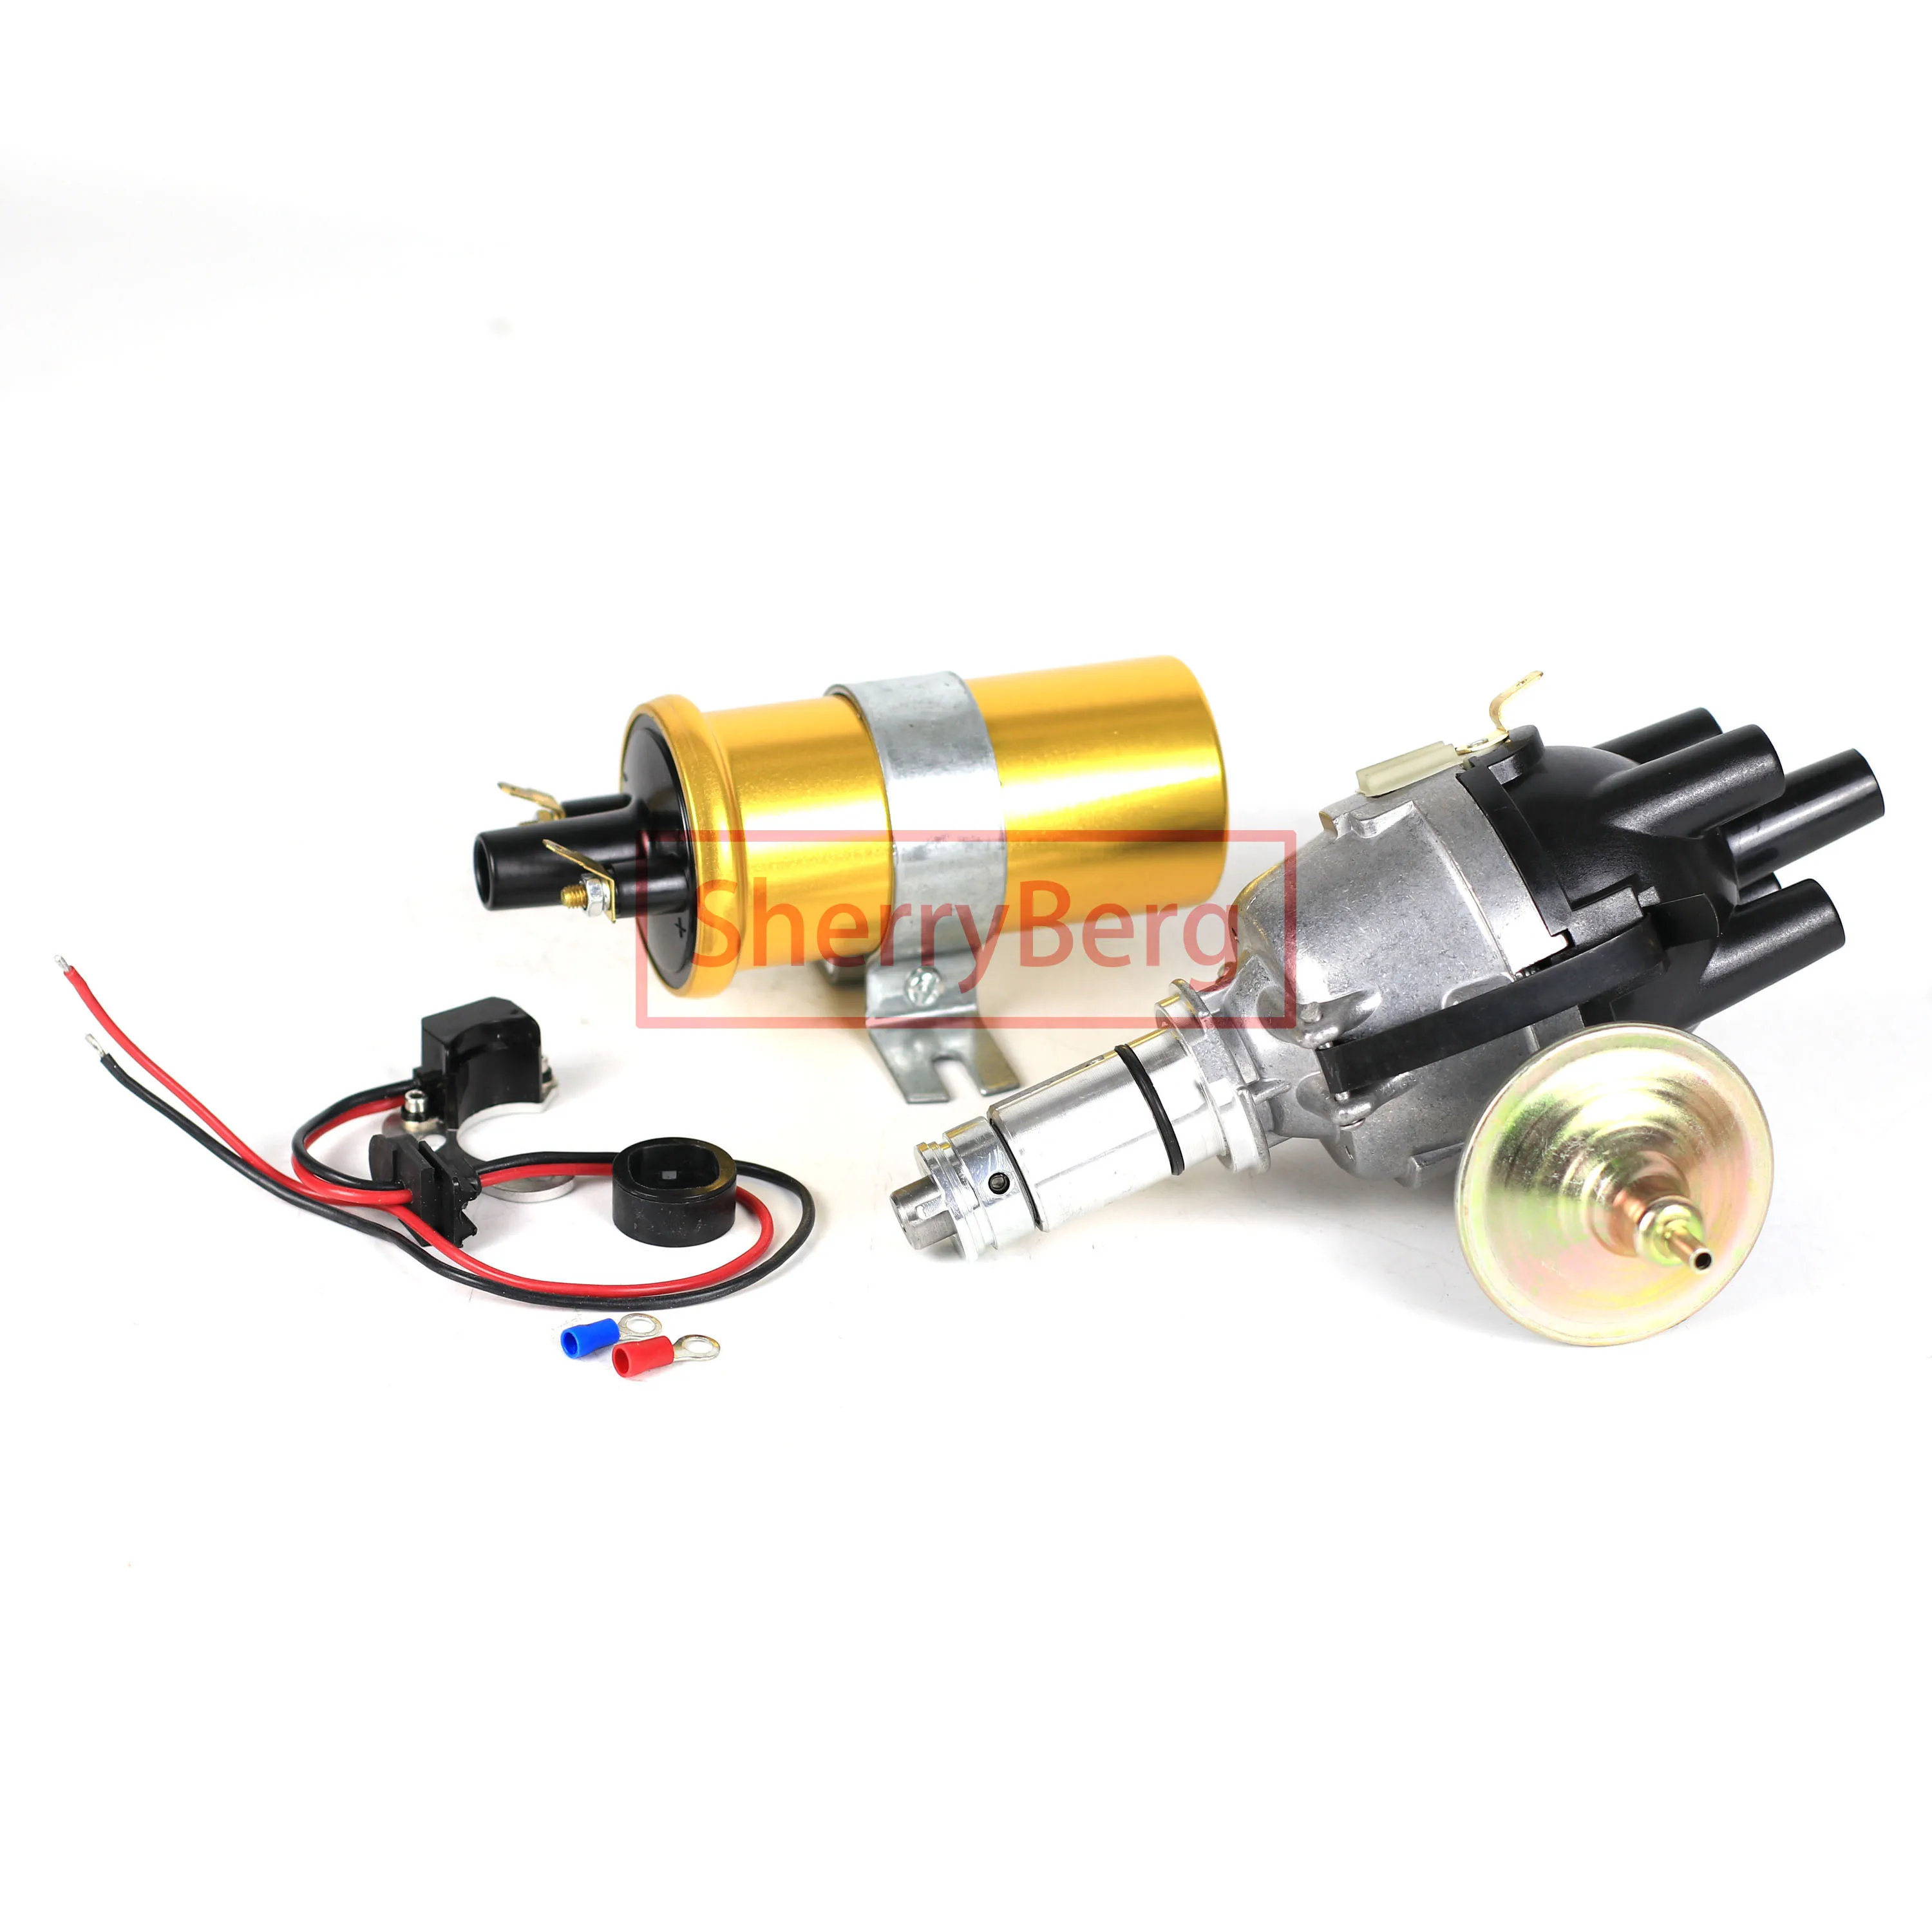 

SherryBerg Distributor + Electrical KIT + COIL for Lucas TR3, TR4, TR4a Electronic Ignition Performance Kit 25D4 Positive Earth